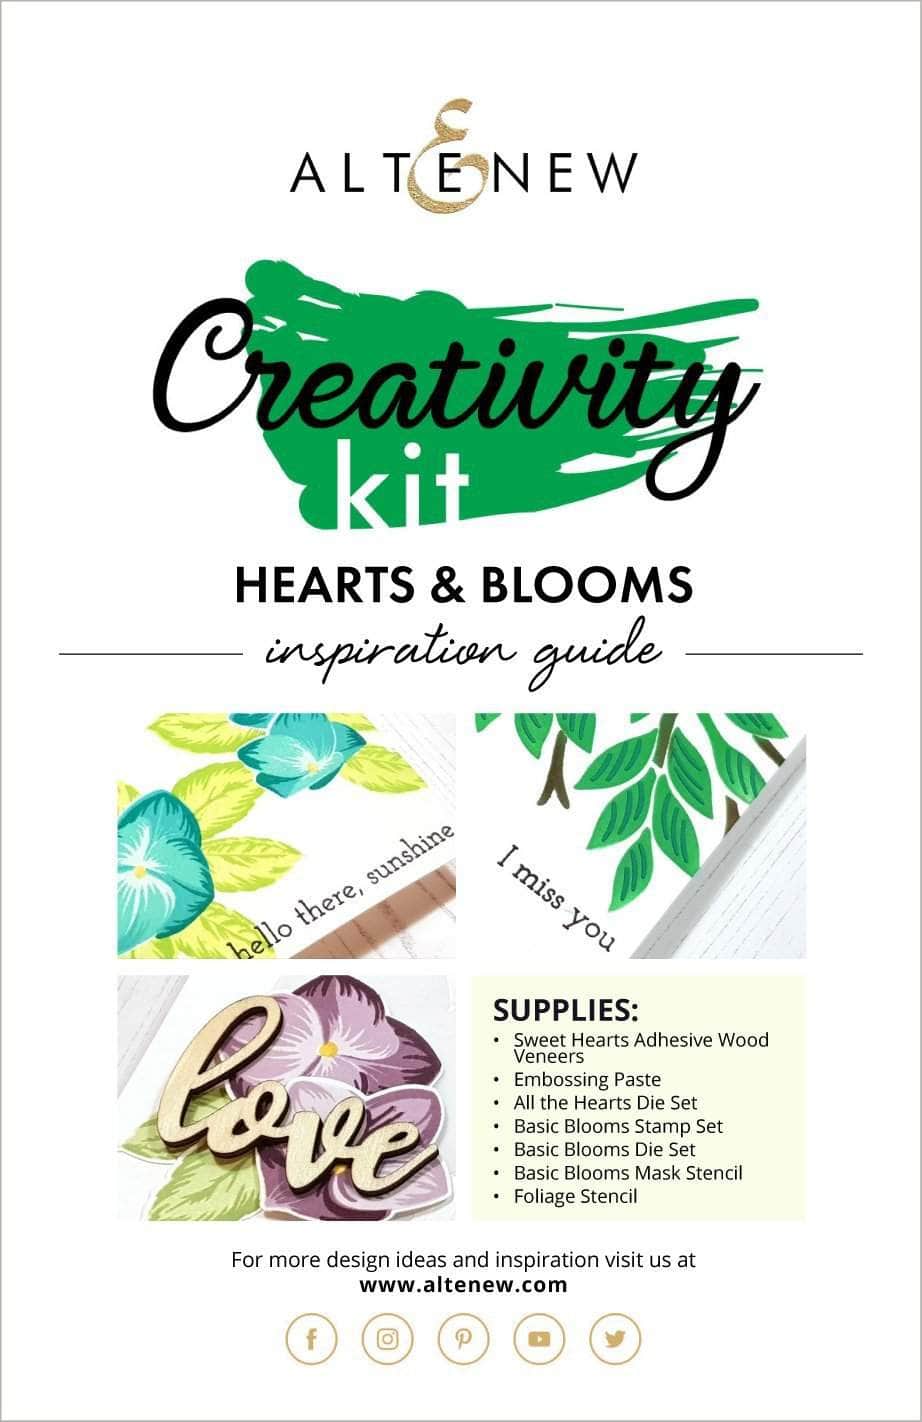 Printed Media Hearts & Blooms Creativity Kit Inspiration Guide